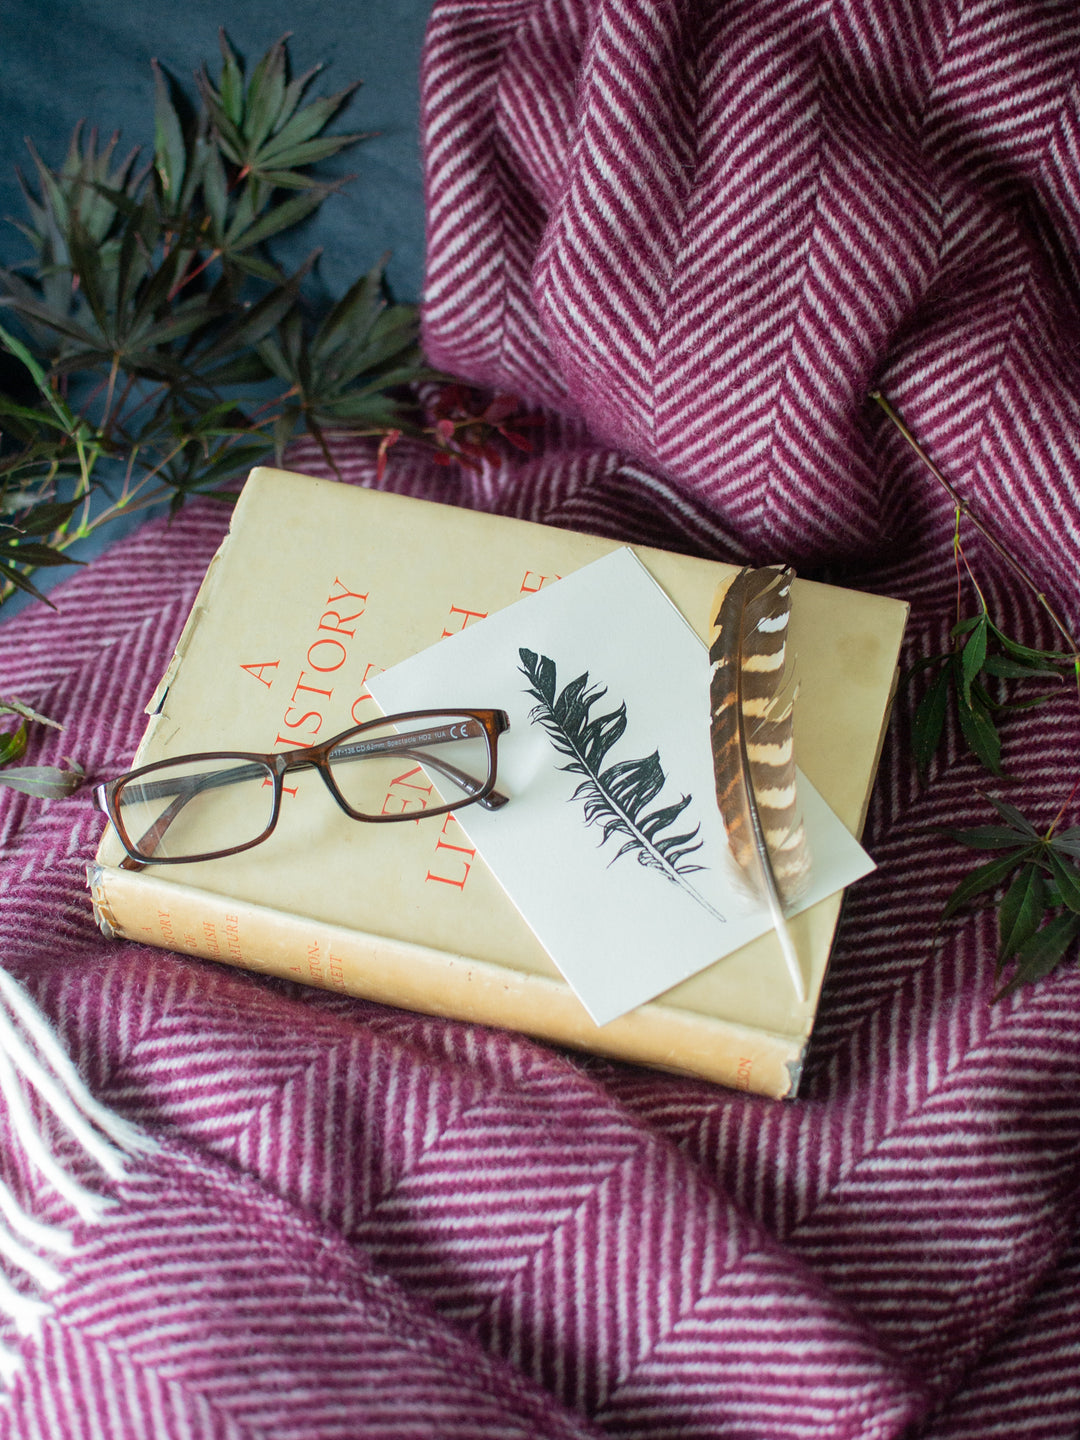 A book, a picture, a feather, and a pair of glasses placed on top of a burgundy herringbone wool throw.